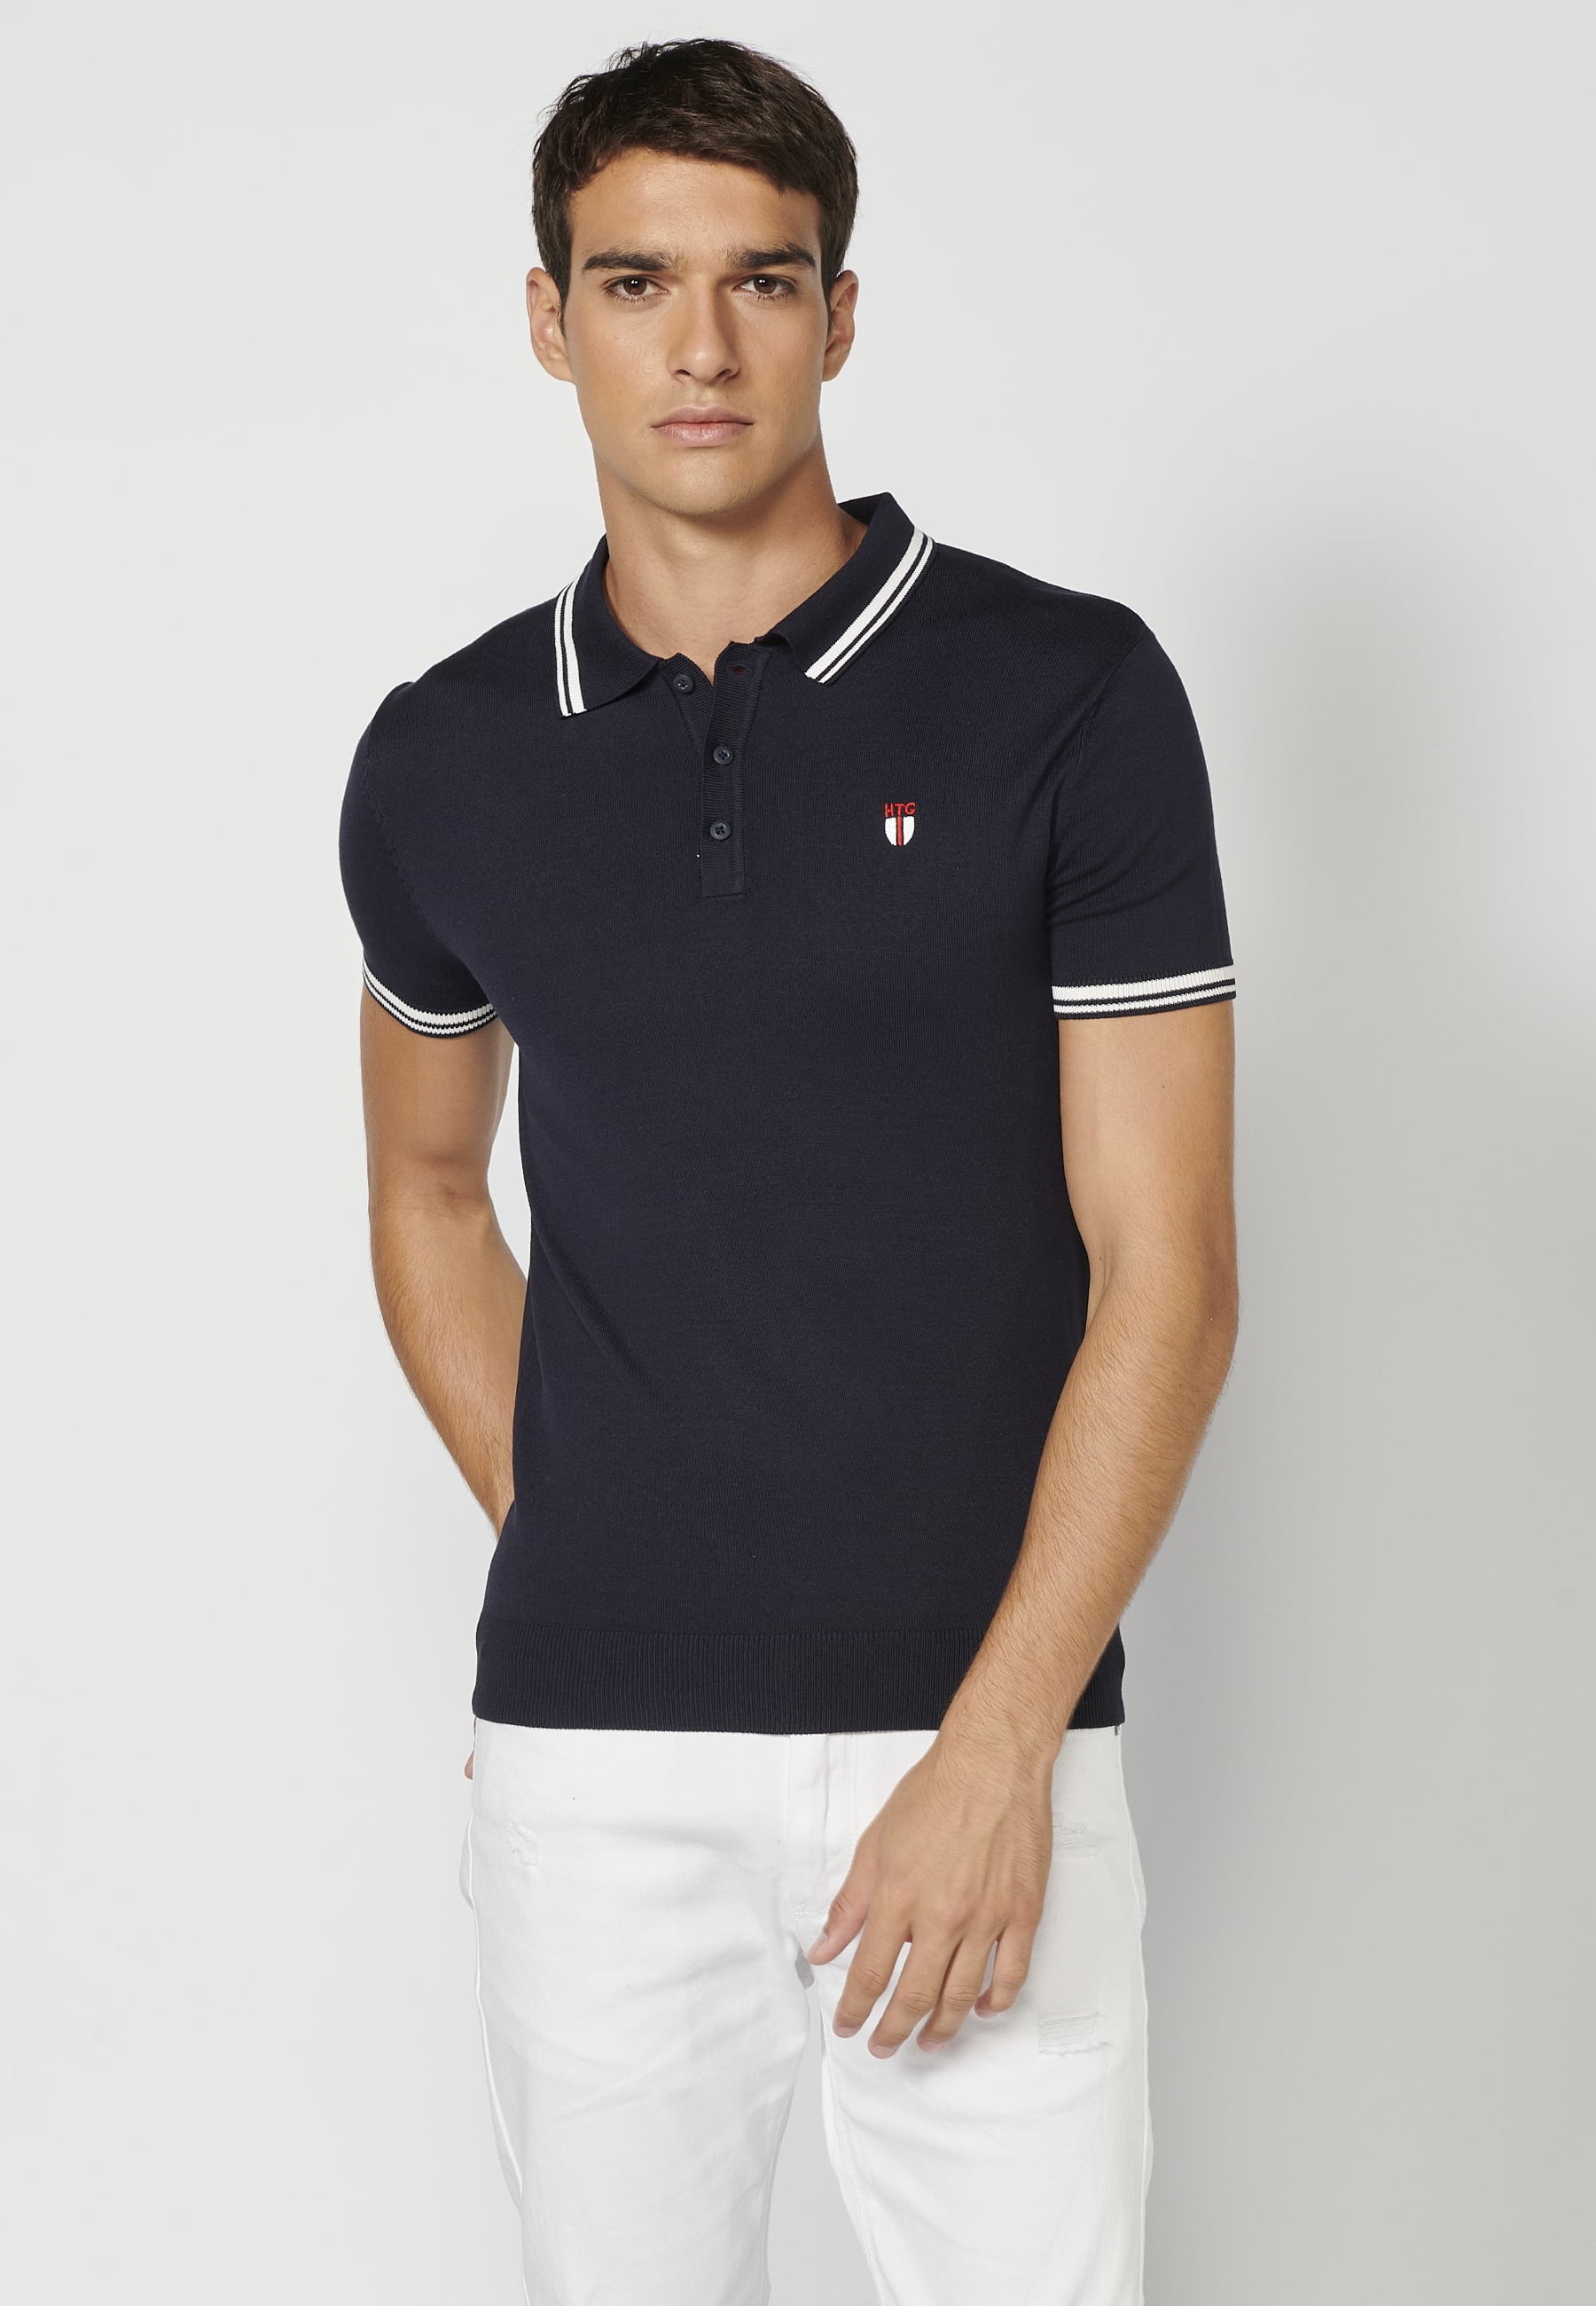 Navy short-sleeved knitted polo shirt with shirt collar for Men